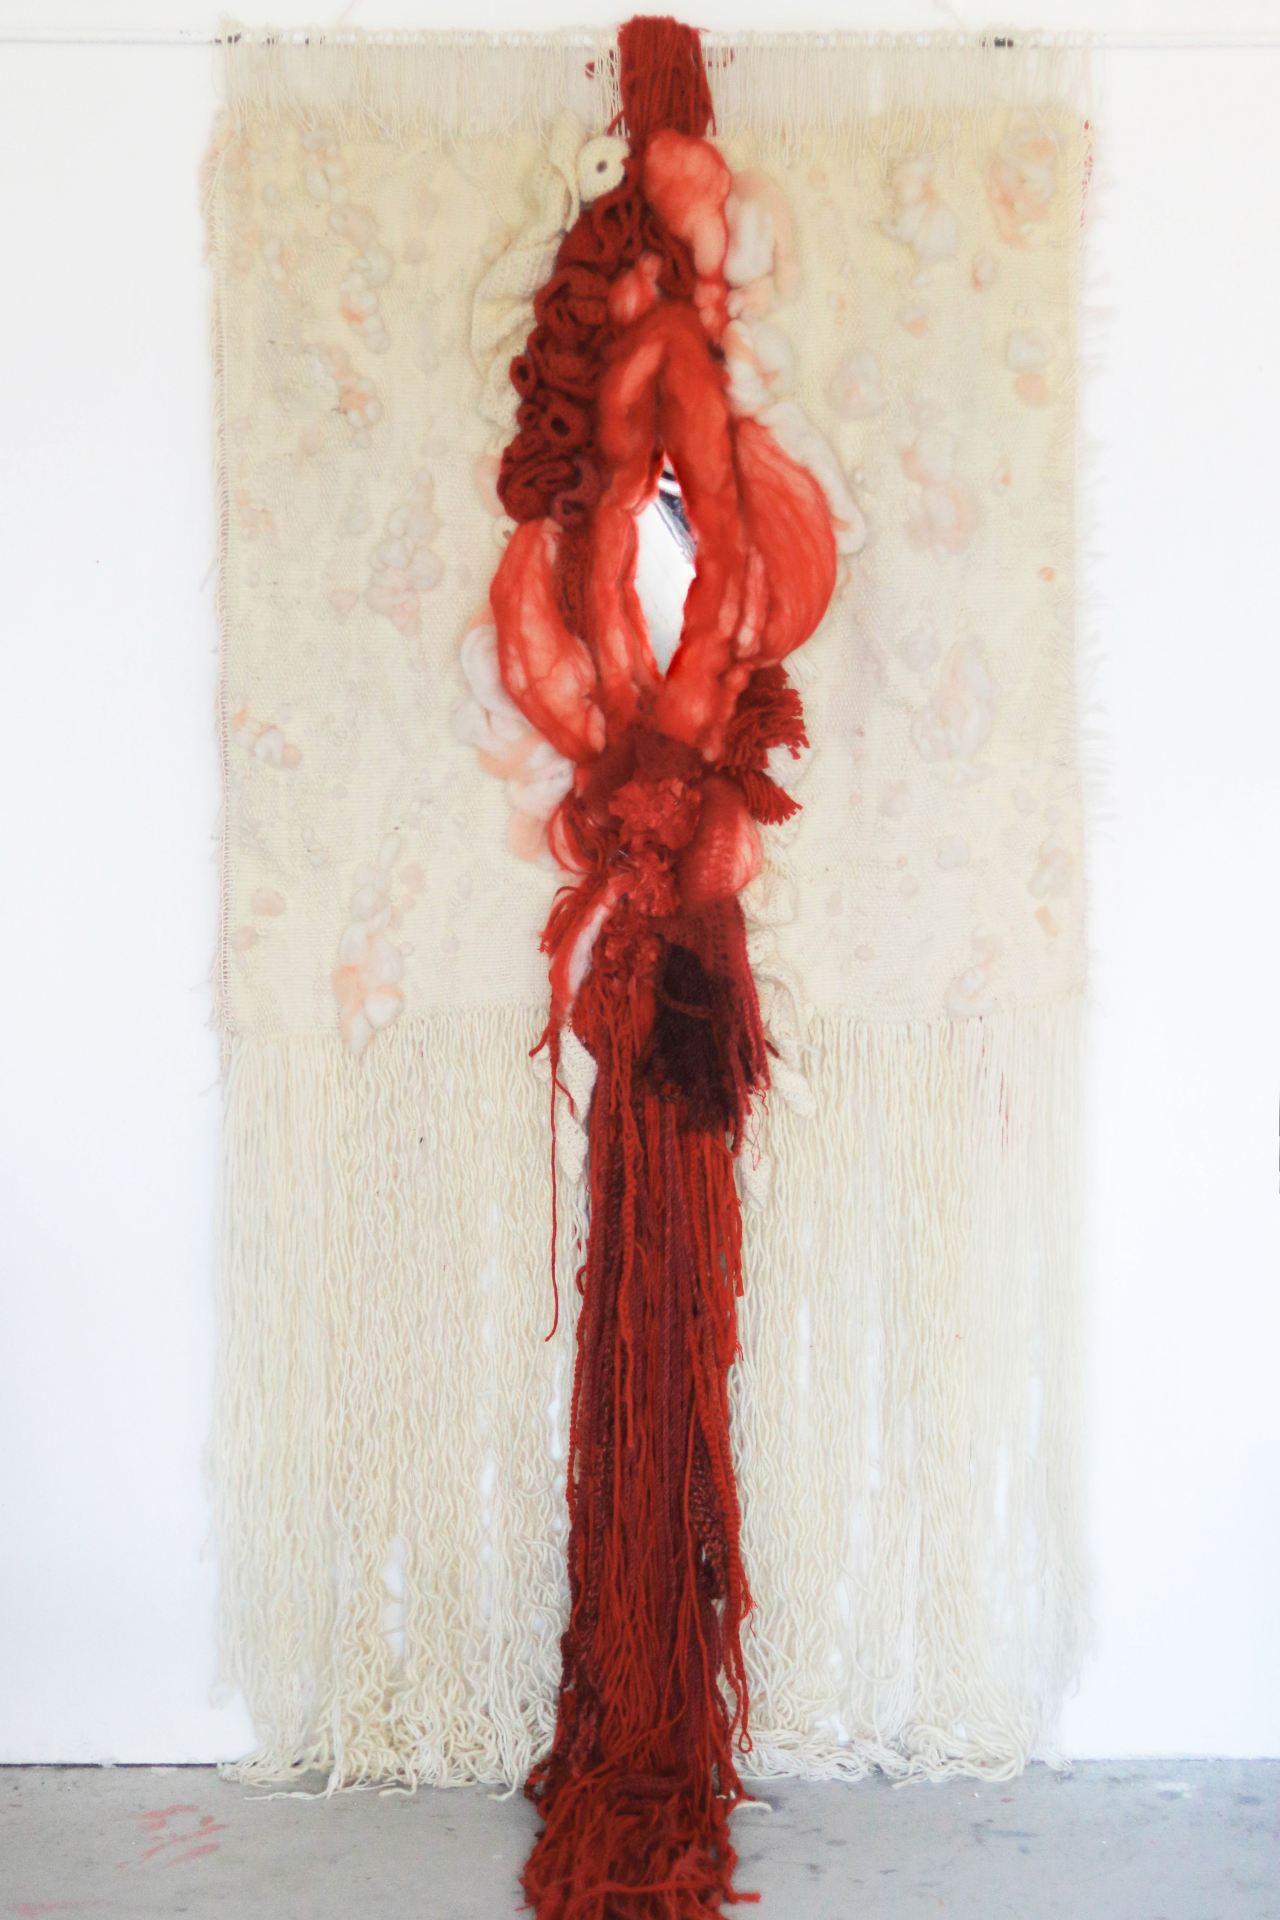 A textile work of an abstracted, red vagina mounted on a cream background and hung on a white wall.
